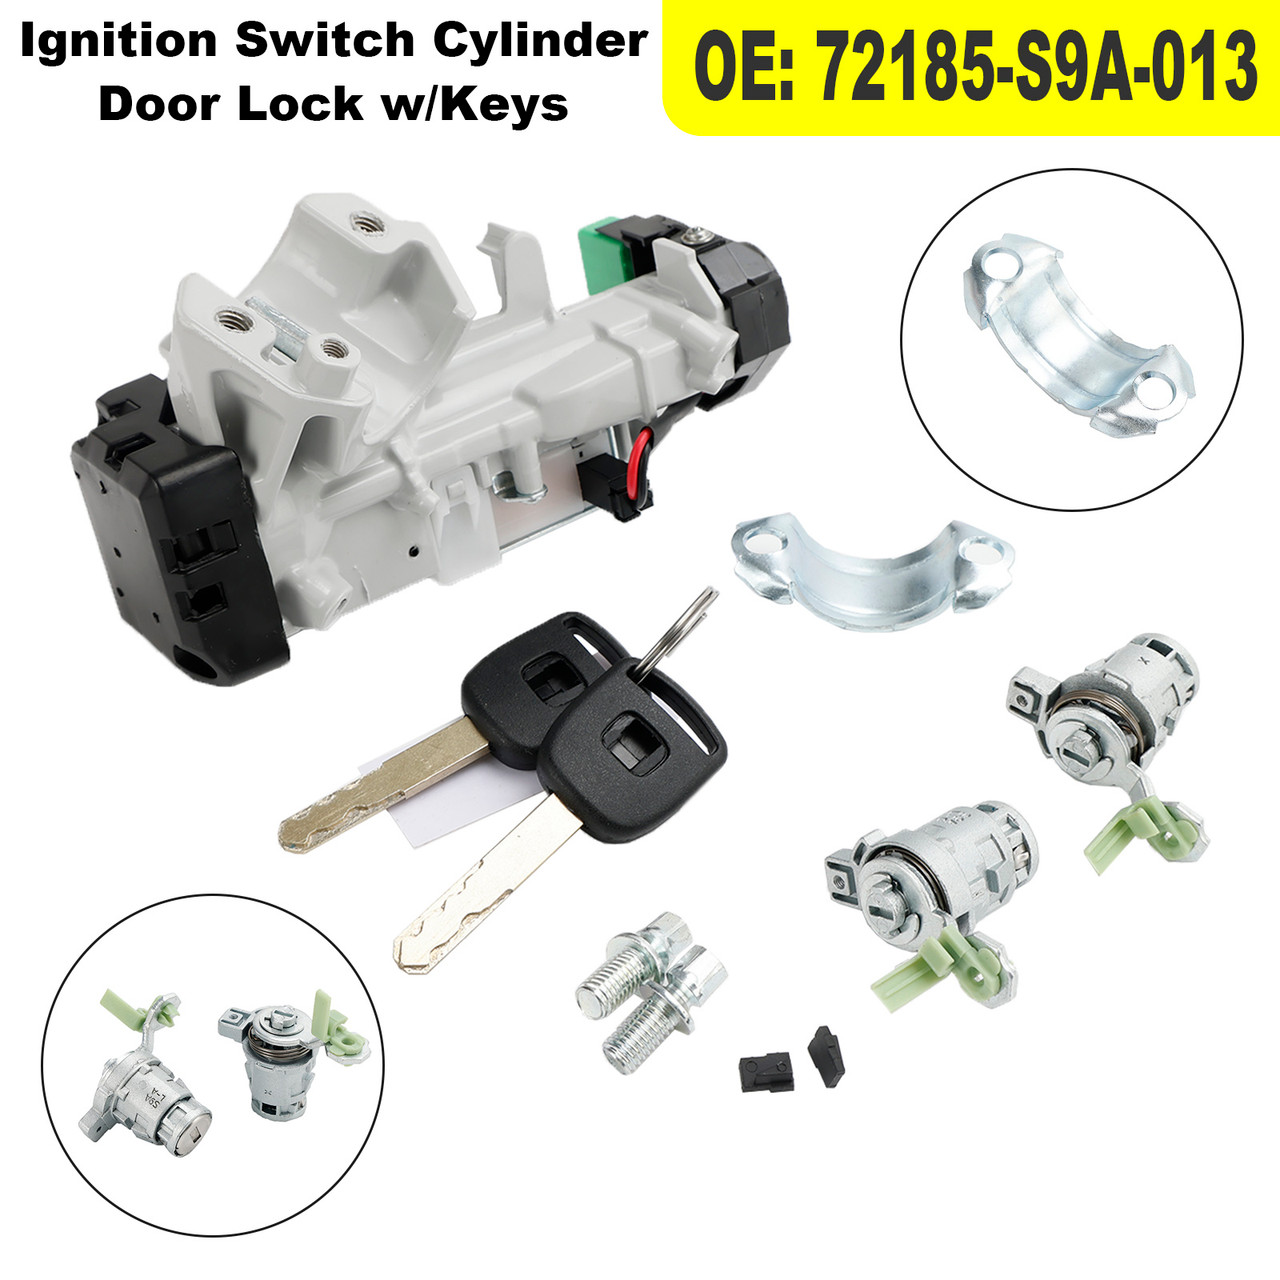 Ignition Switch Cylinder Door Lock 72185-S9A-013 w/Key For Honda Element CR-V Civic